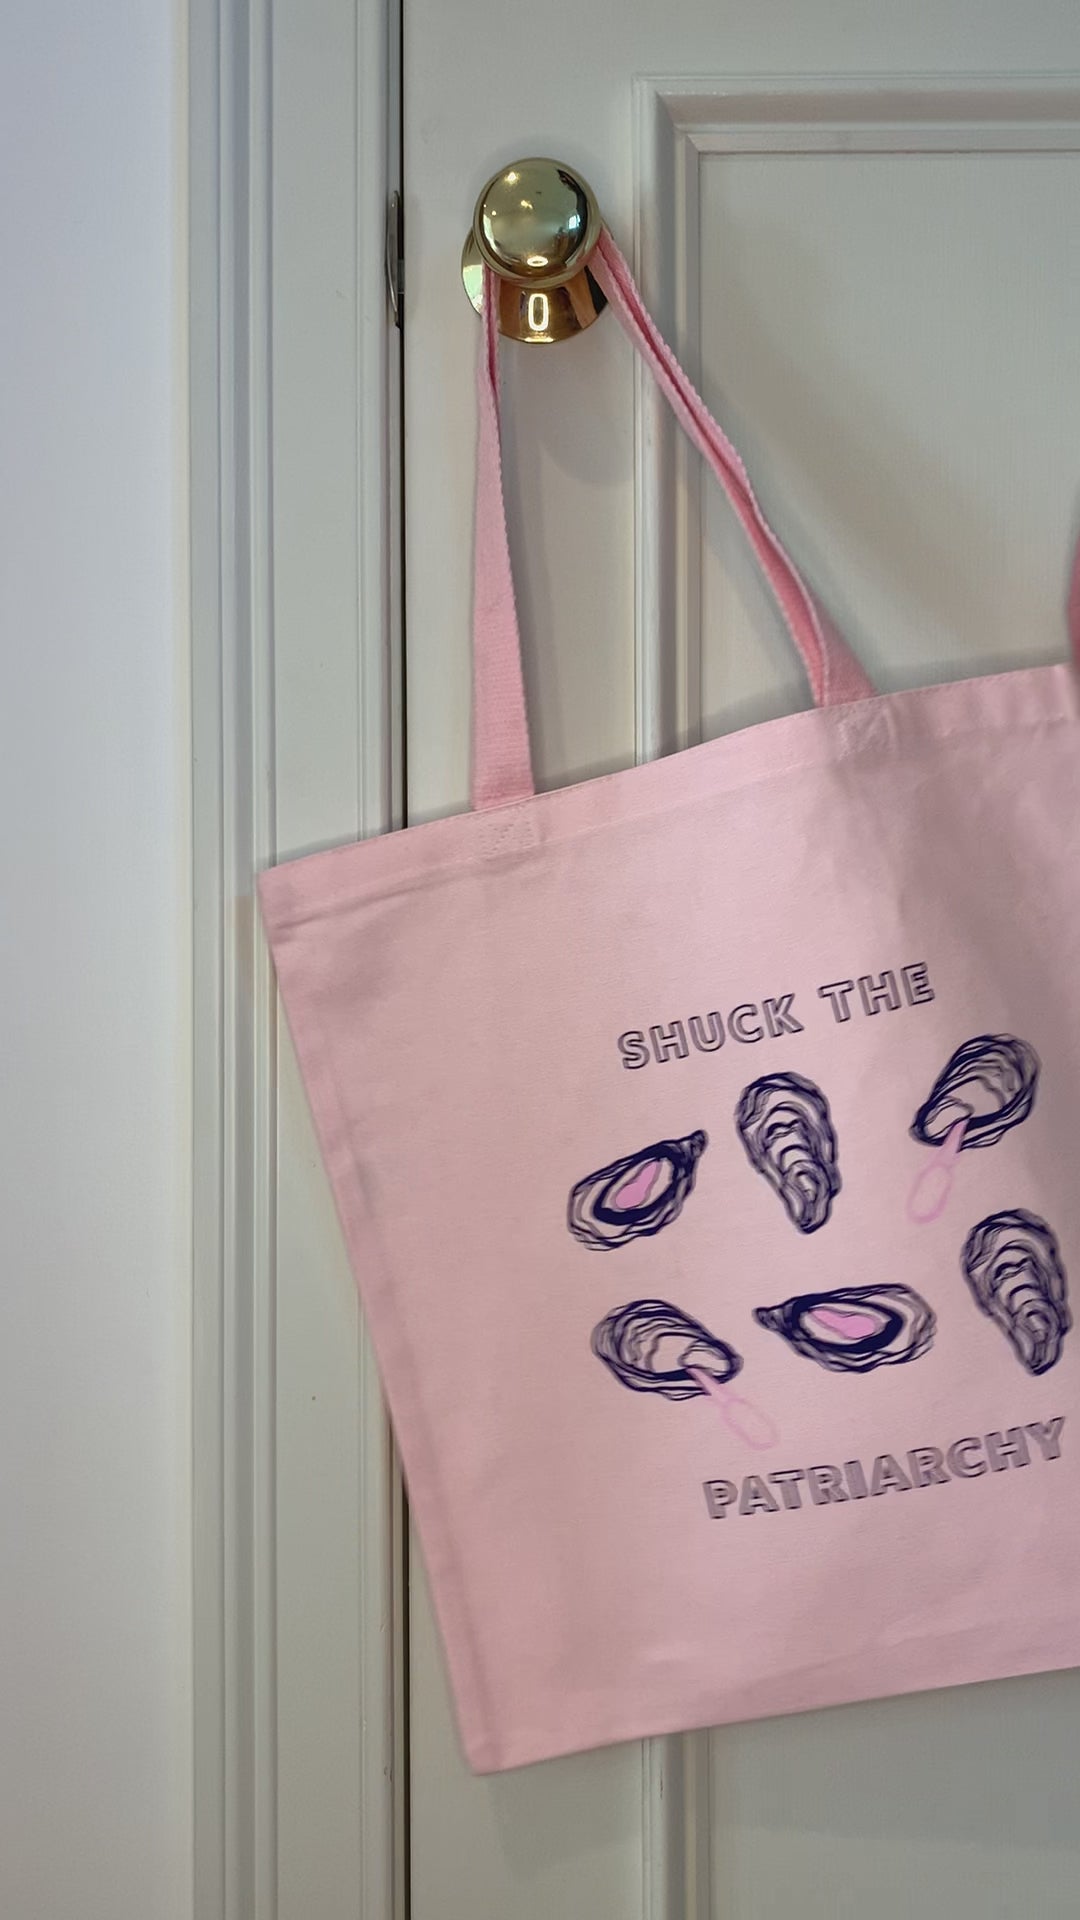 A pink tote that reads "Shuck the Patriarchy" hangs on a doorknob